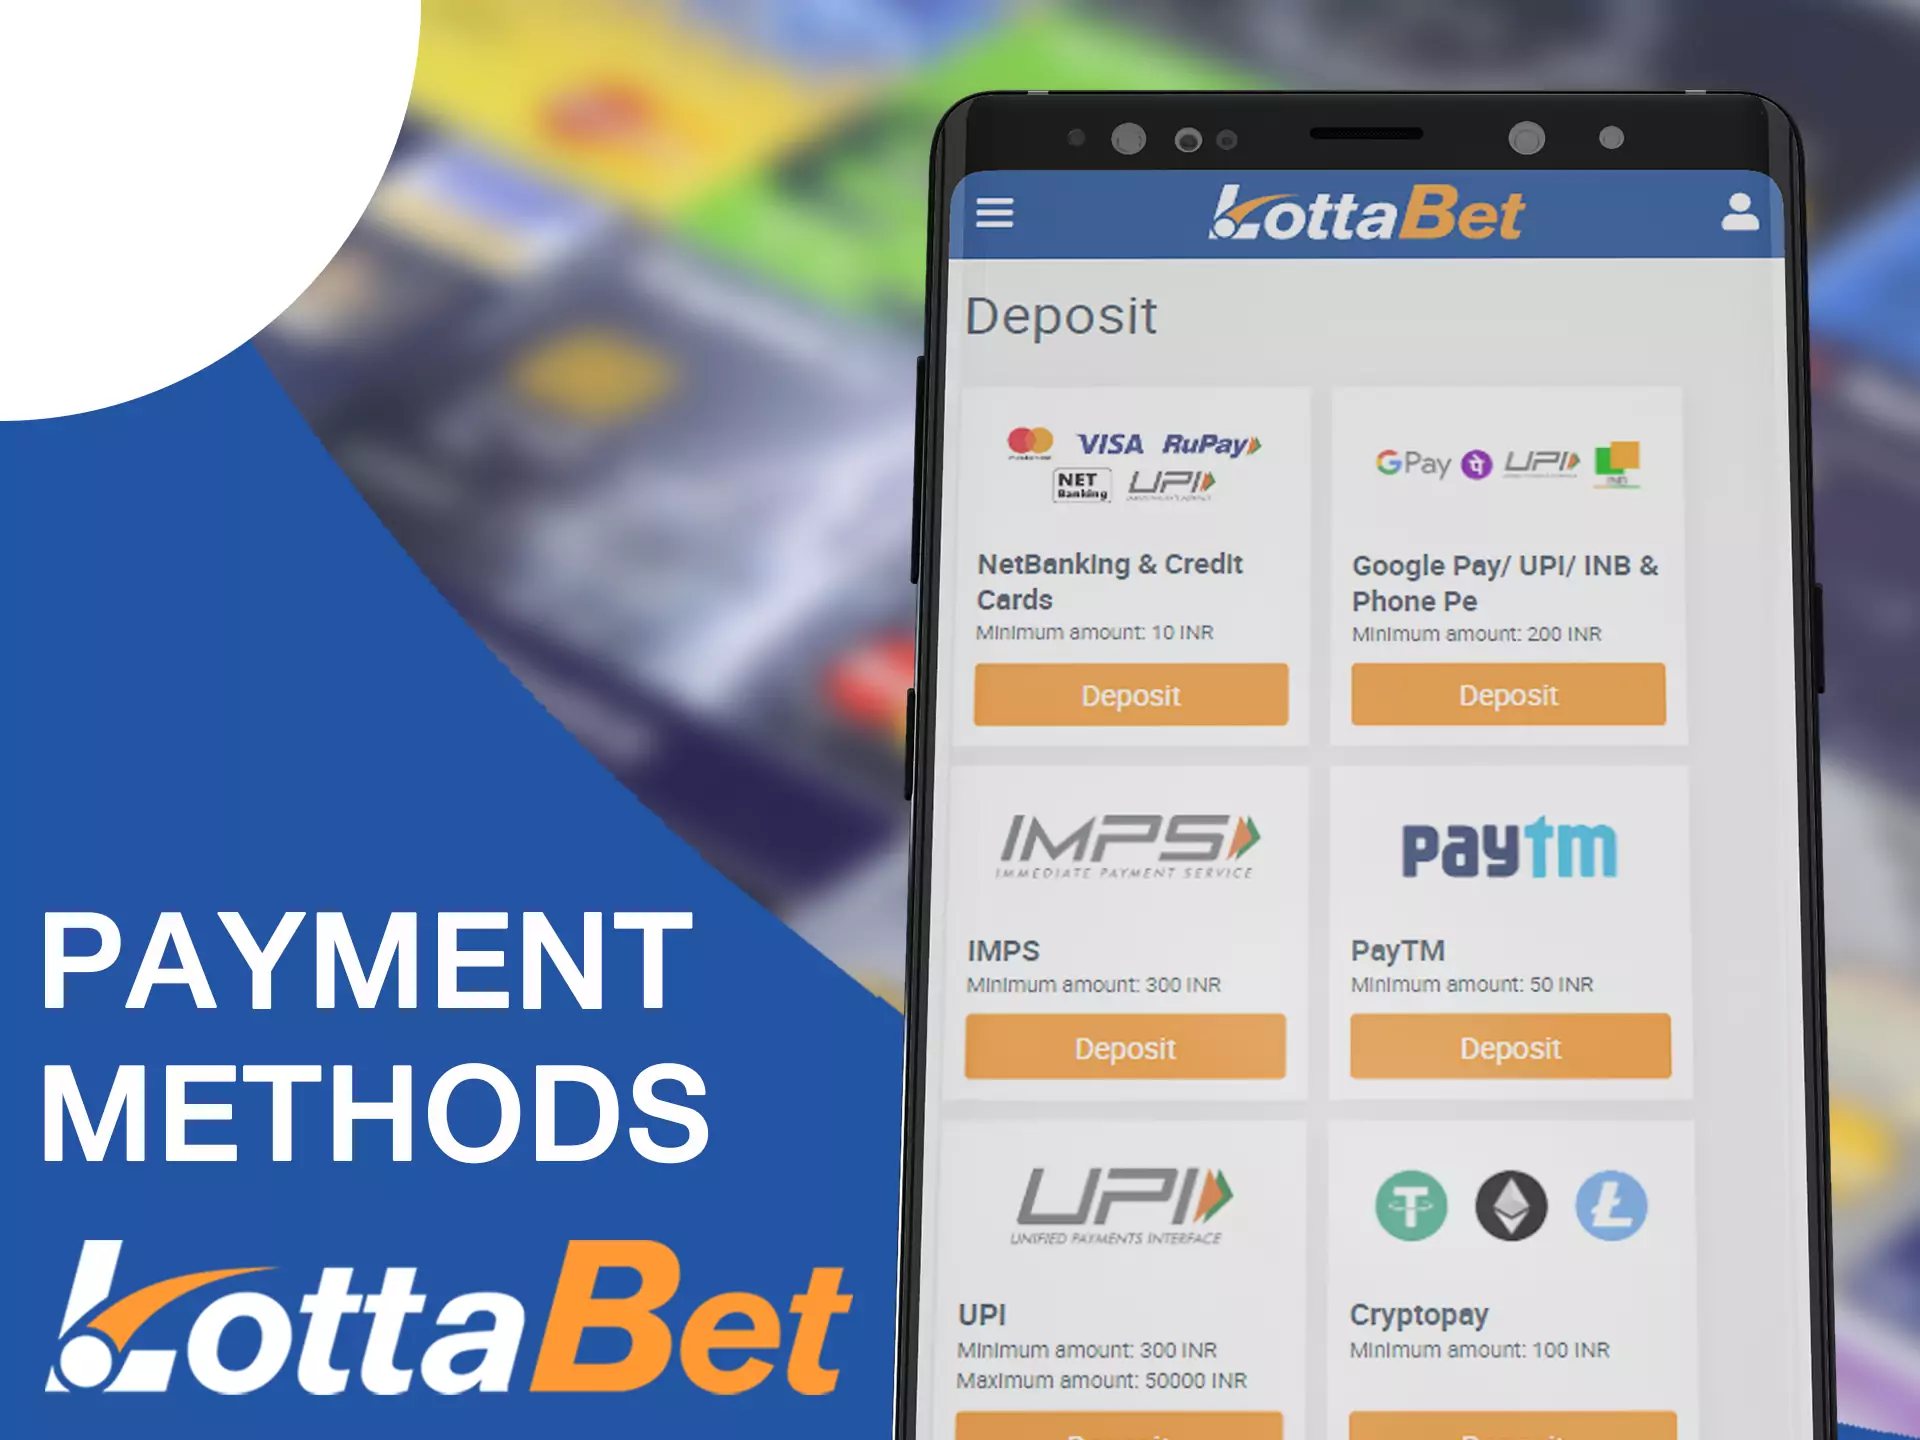 Refill your account in the LottaBet app using your preferred payment method.